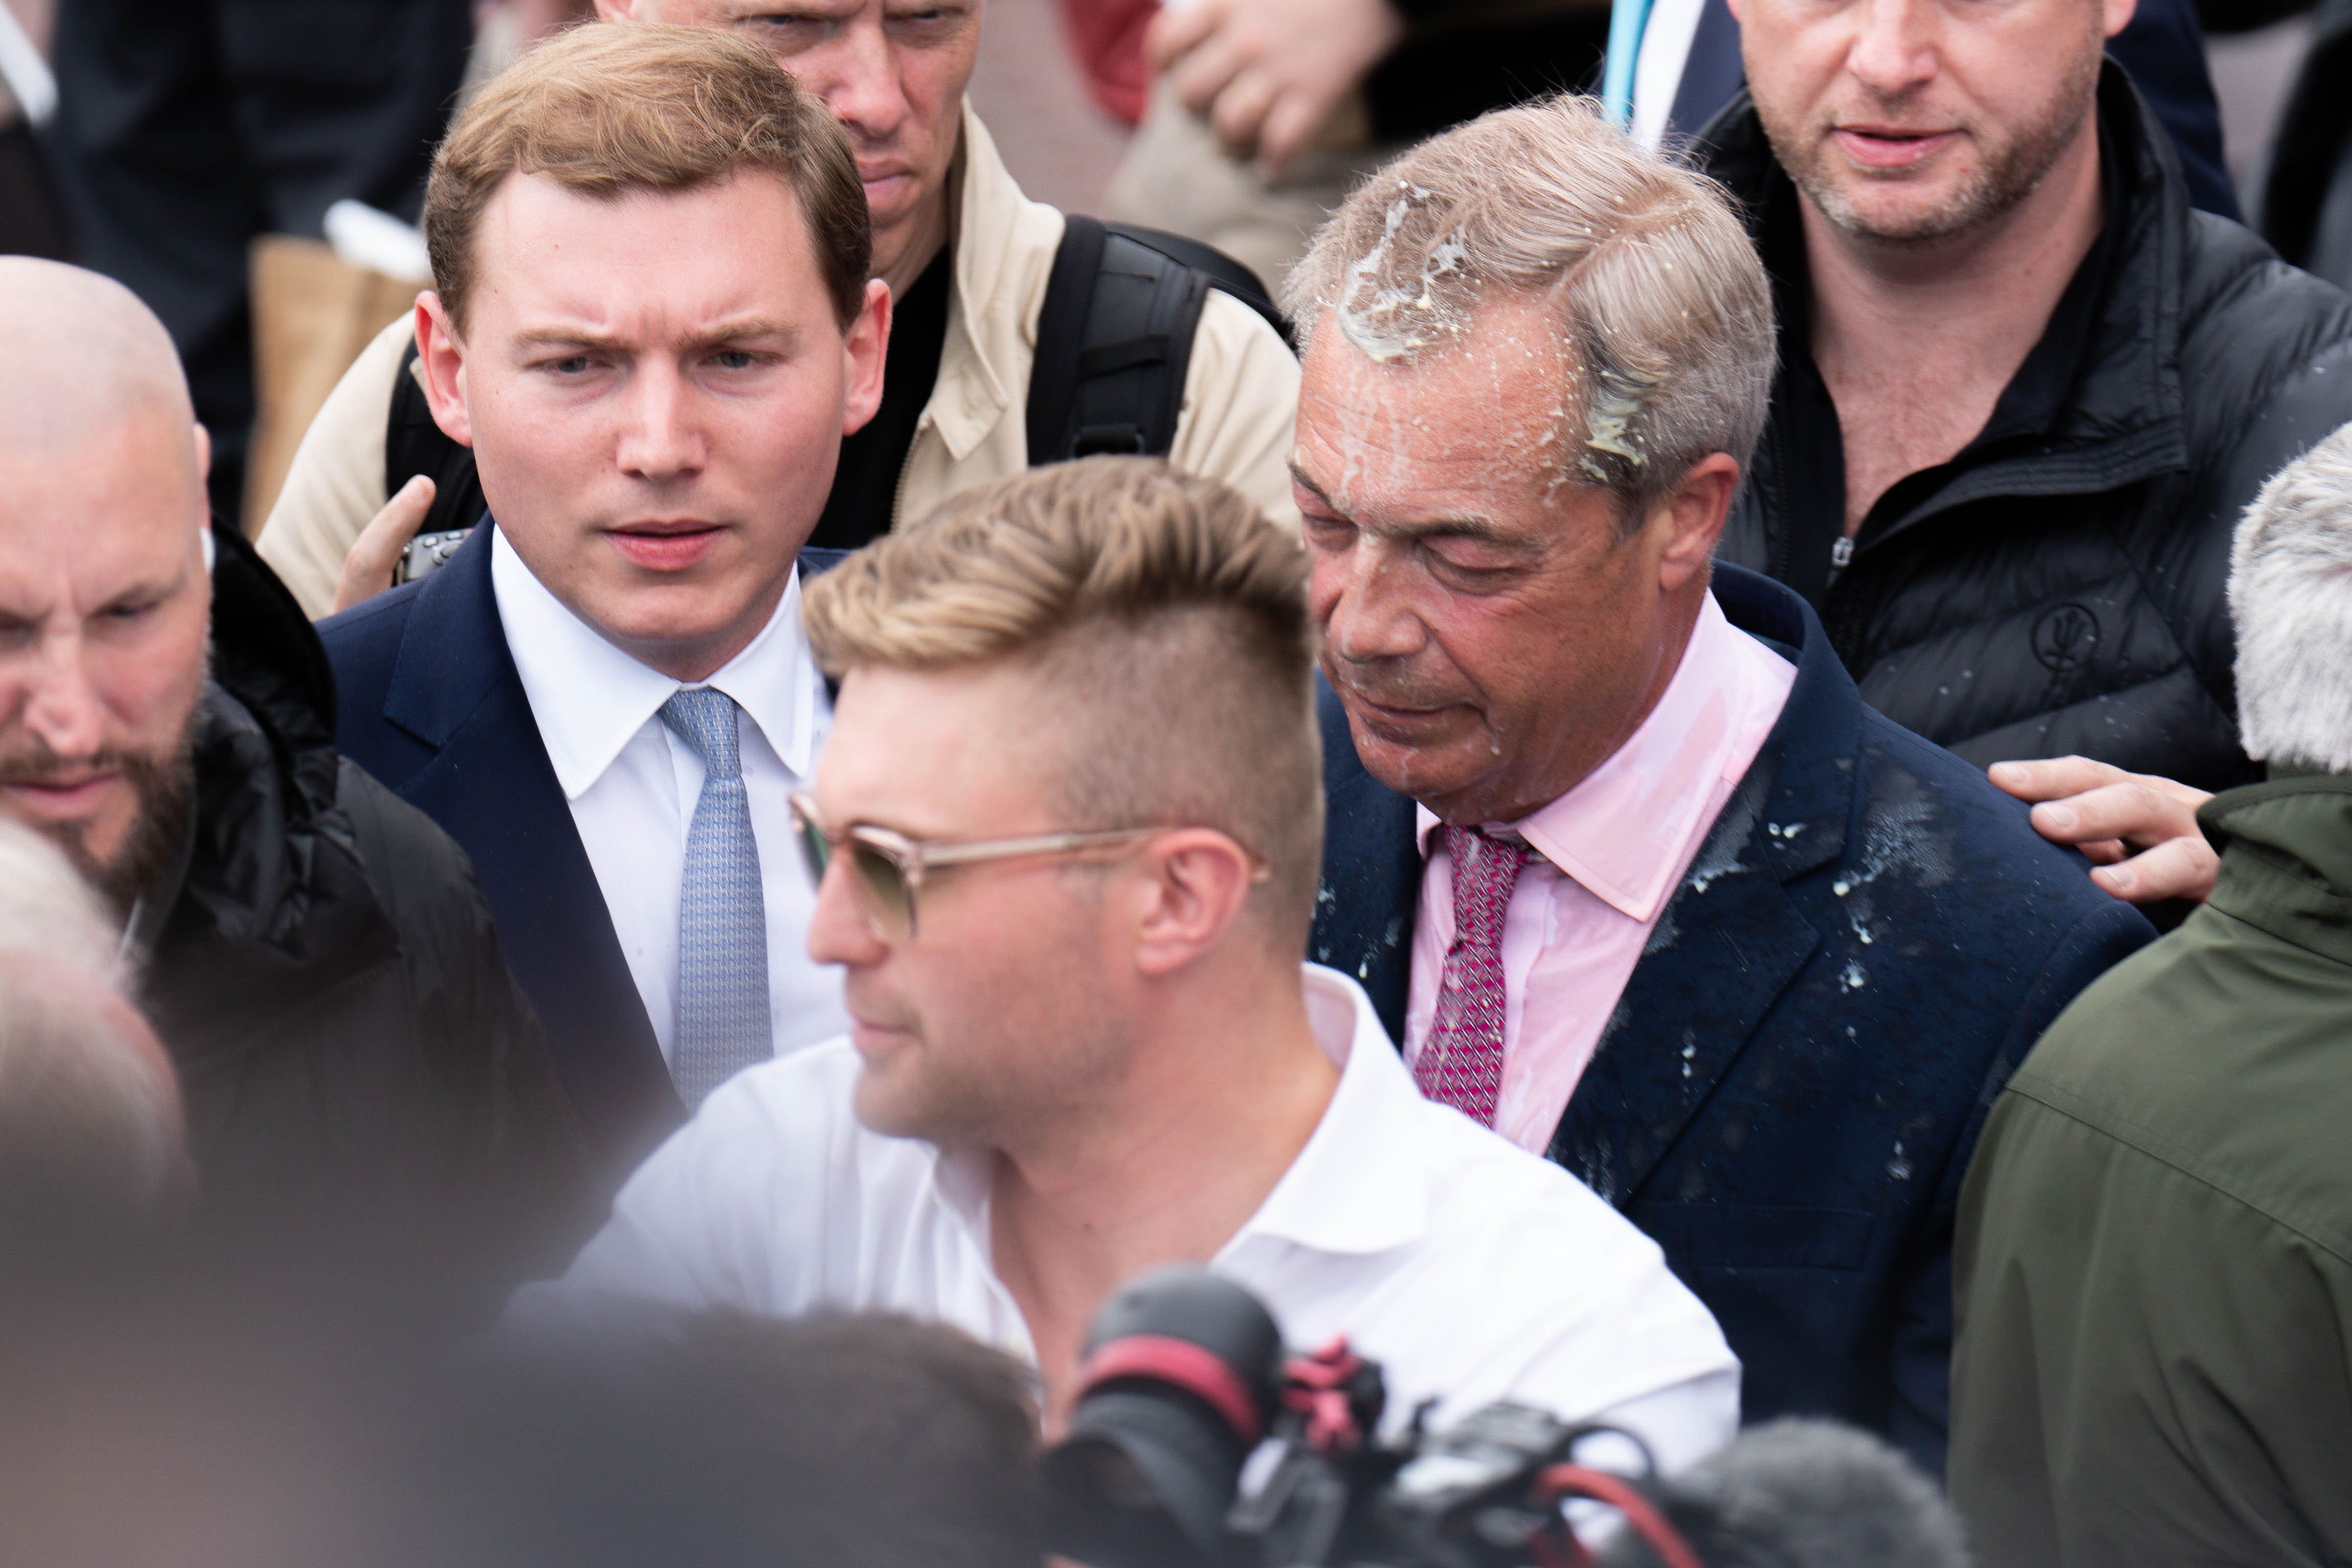 Leader of Reform UK Nigel Farage had a milkshake thrown over him as he left the Moon and Starfish pub after launching his General Election campaign in Clacton-on-Sea, Essex (James Manning/PA)